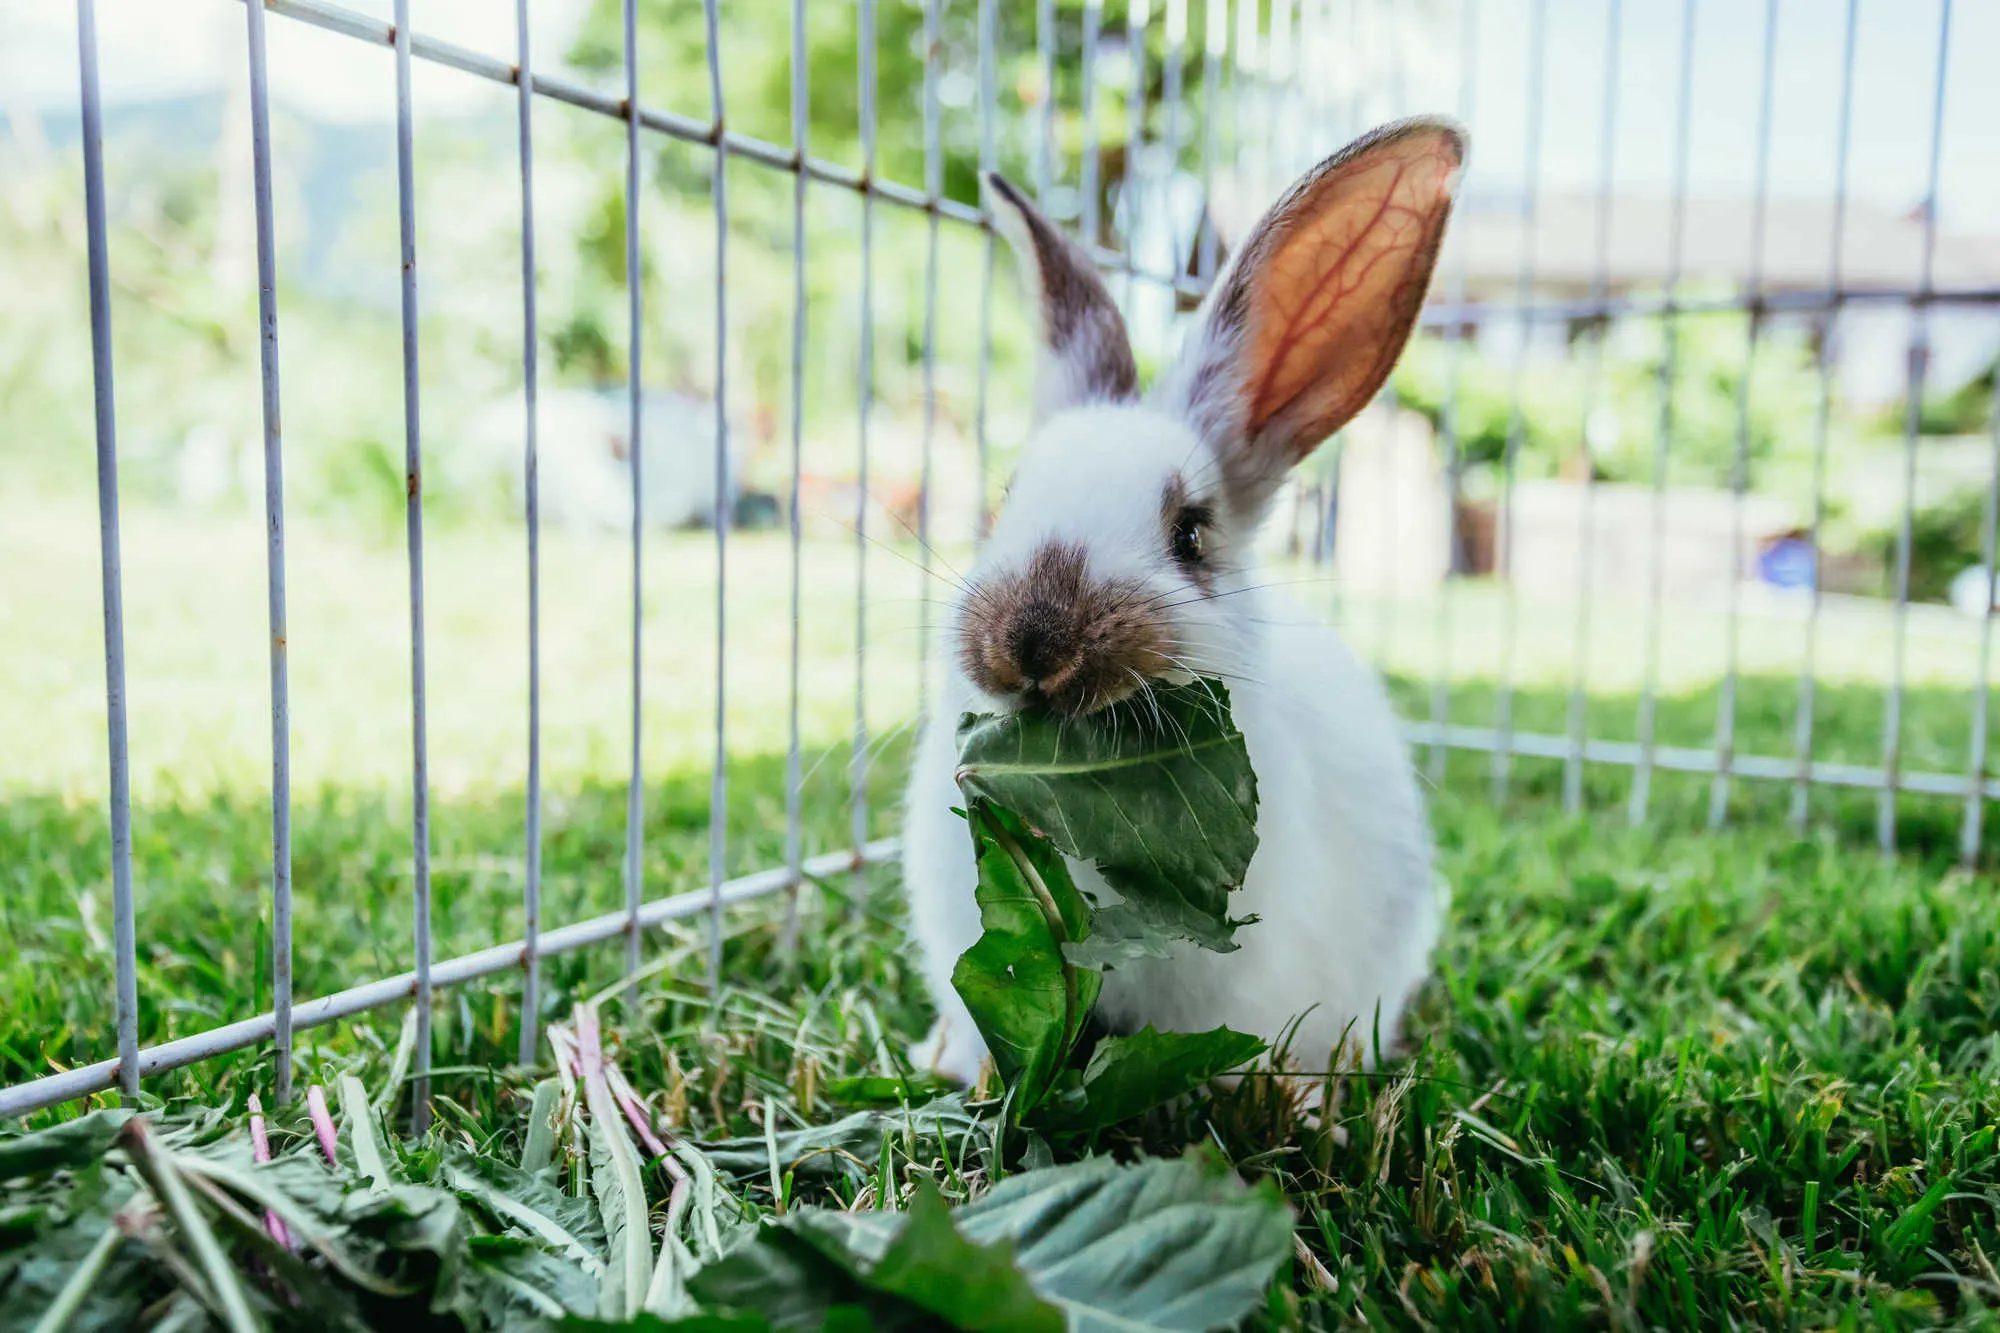 Cute little bunny eats salad in an outdoor compound.